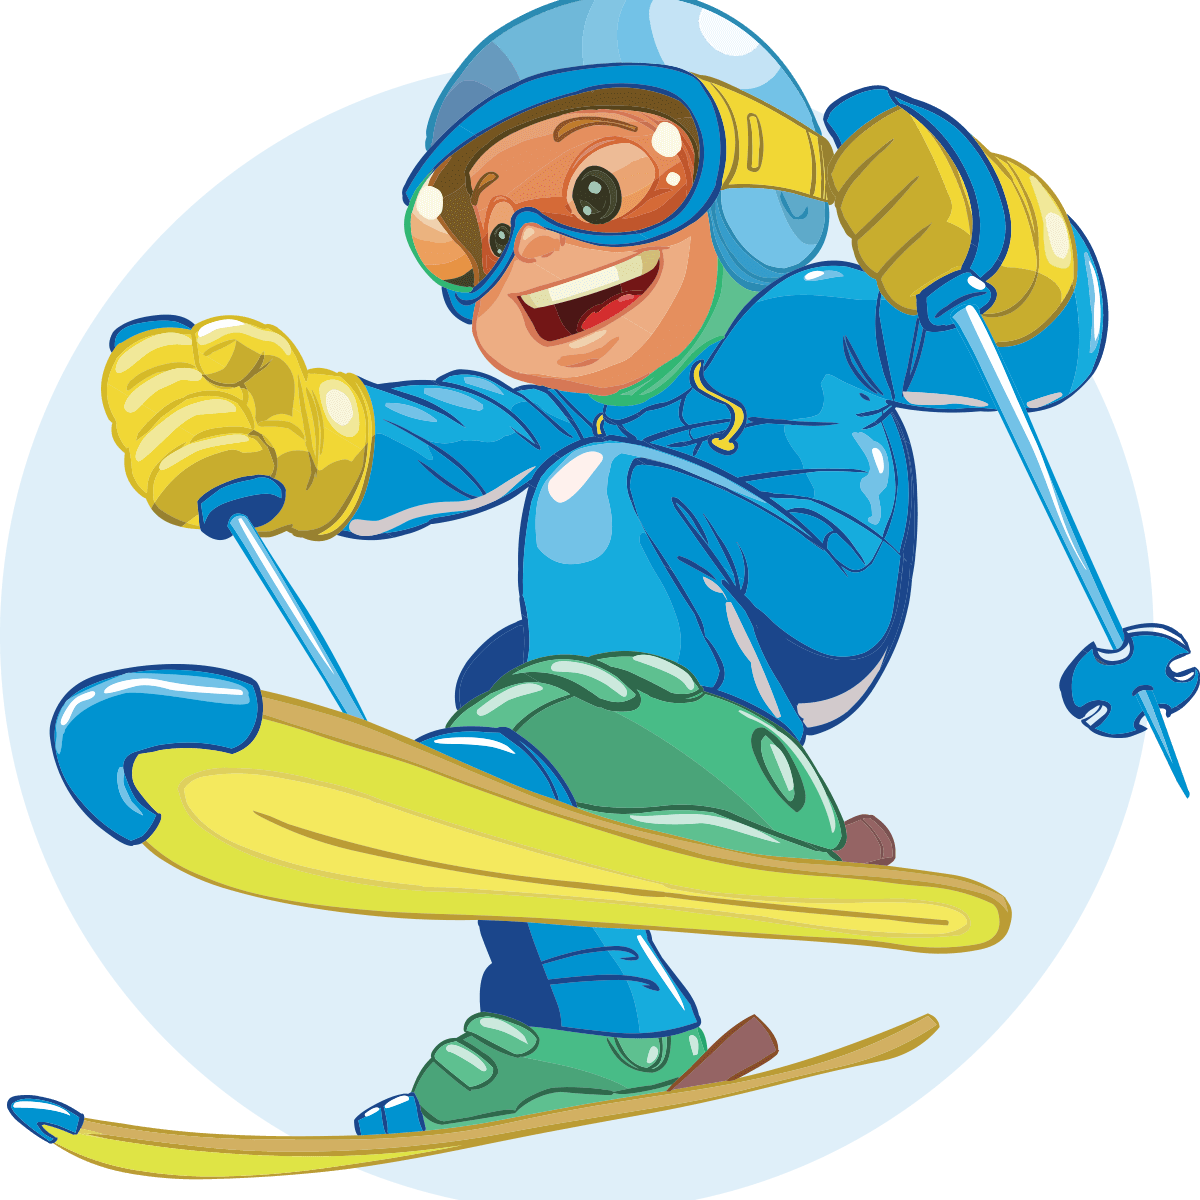 Skiing clipart cute, Skiing cute Transparent FREE for